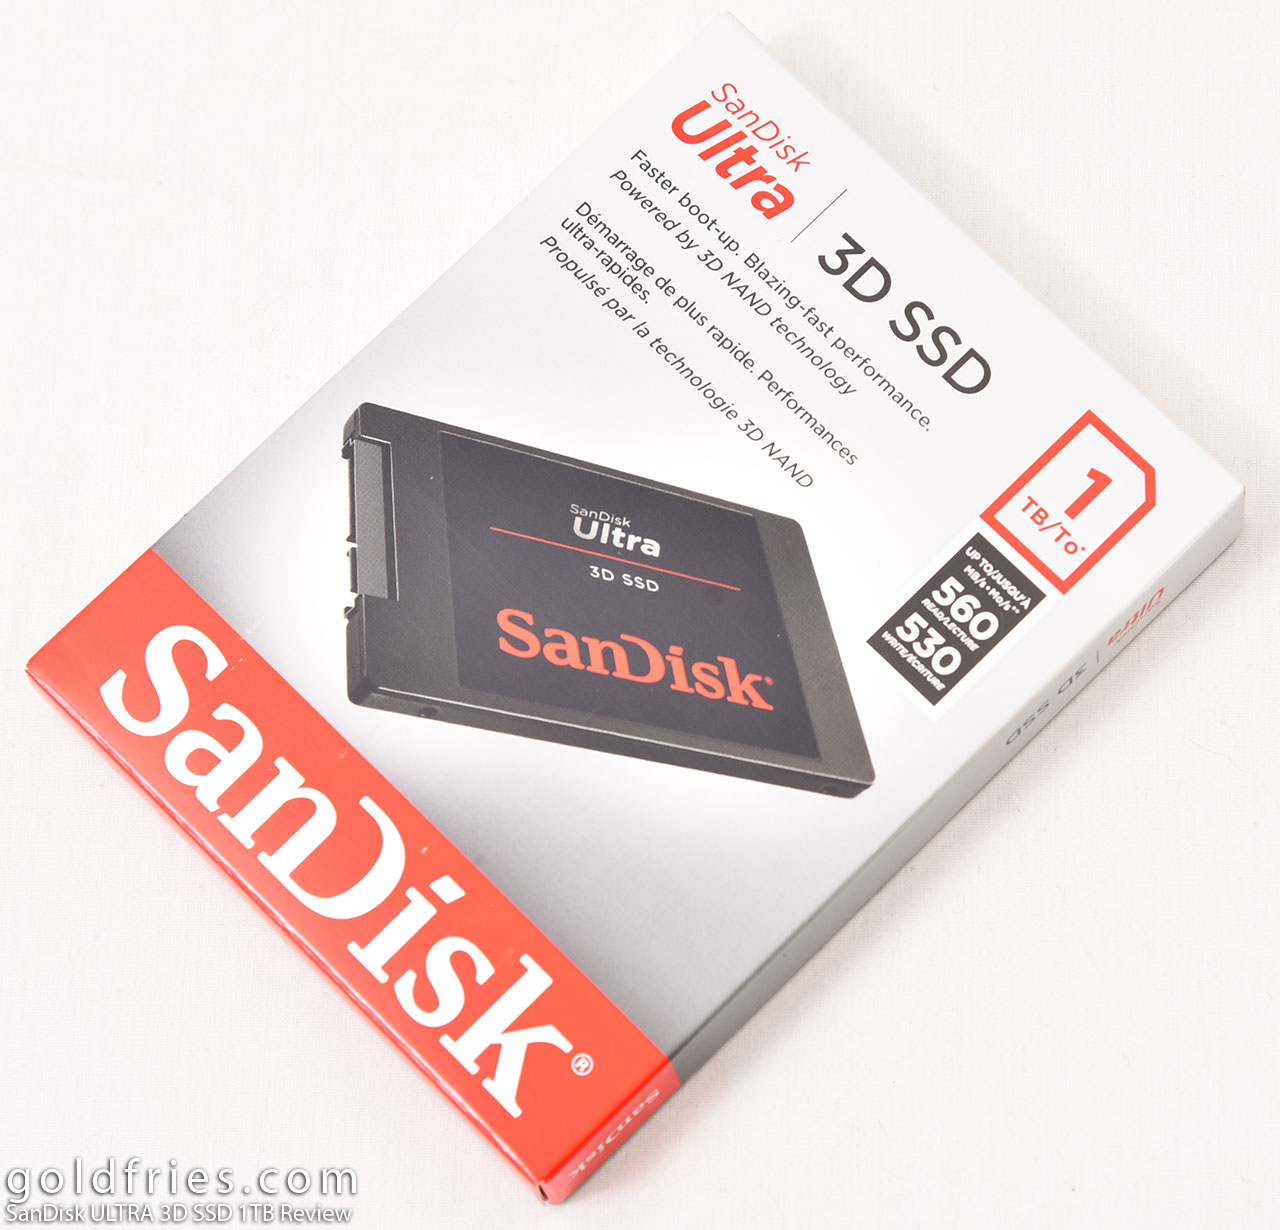 SanDisk ULTRA 3D SSD 1TB Review – goldfries